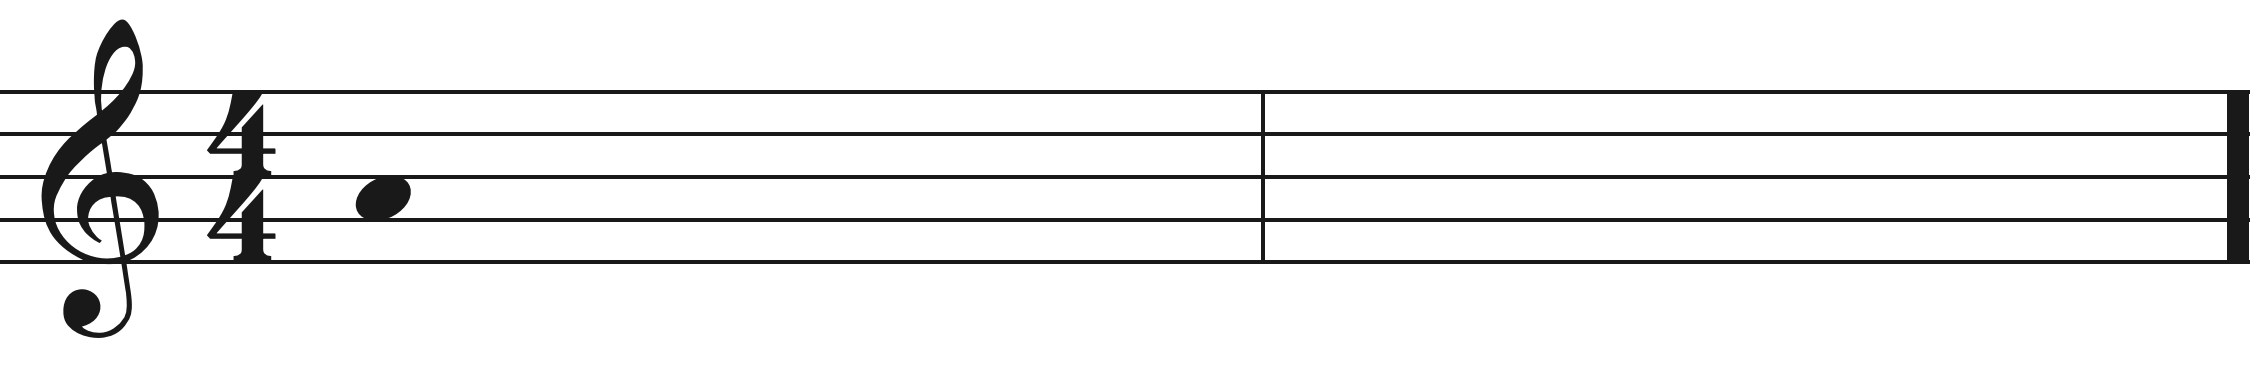 Melodic Sequences Aural Training exercise example4